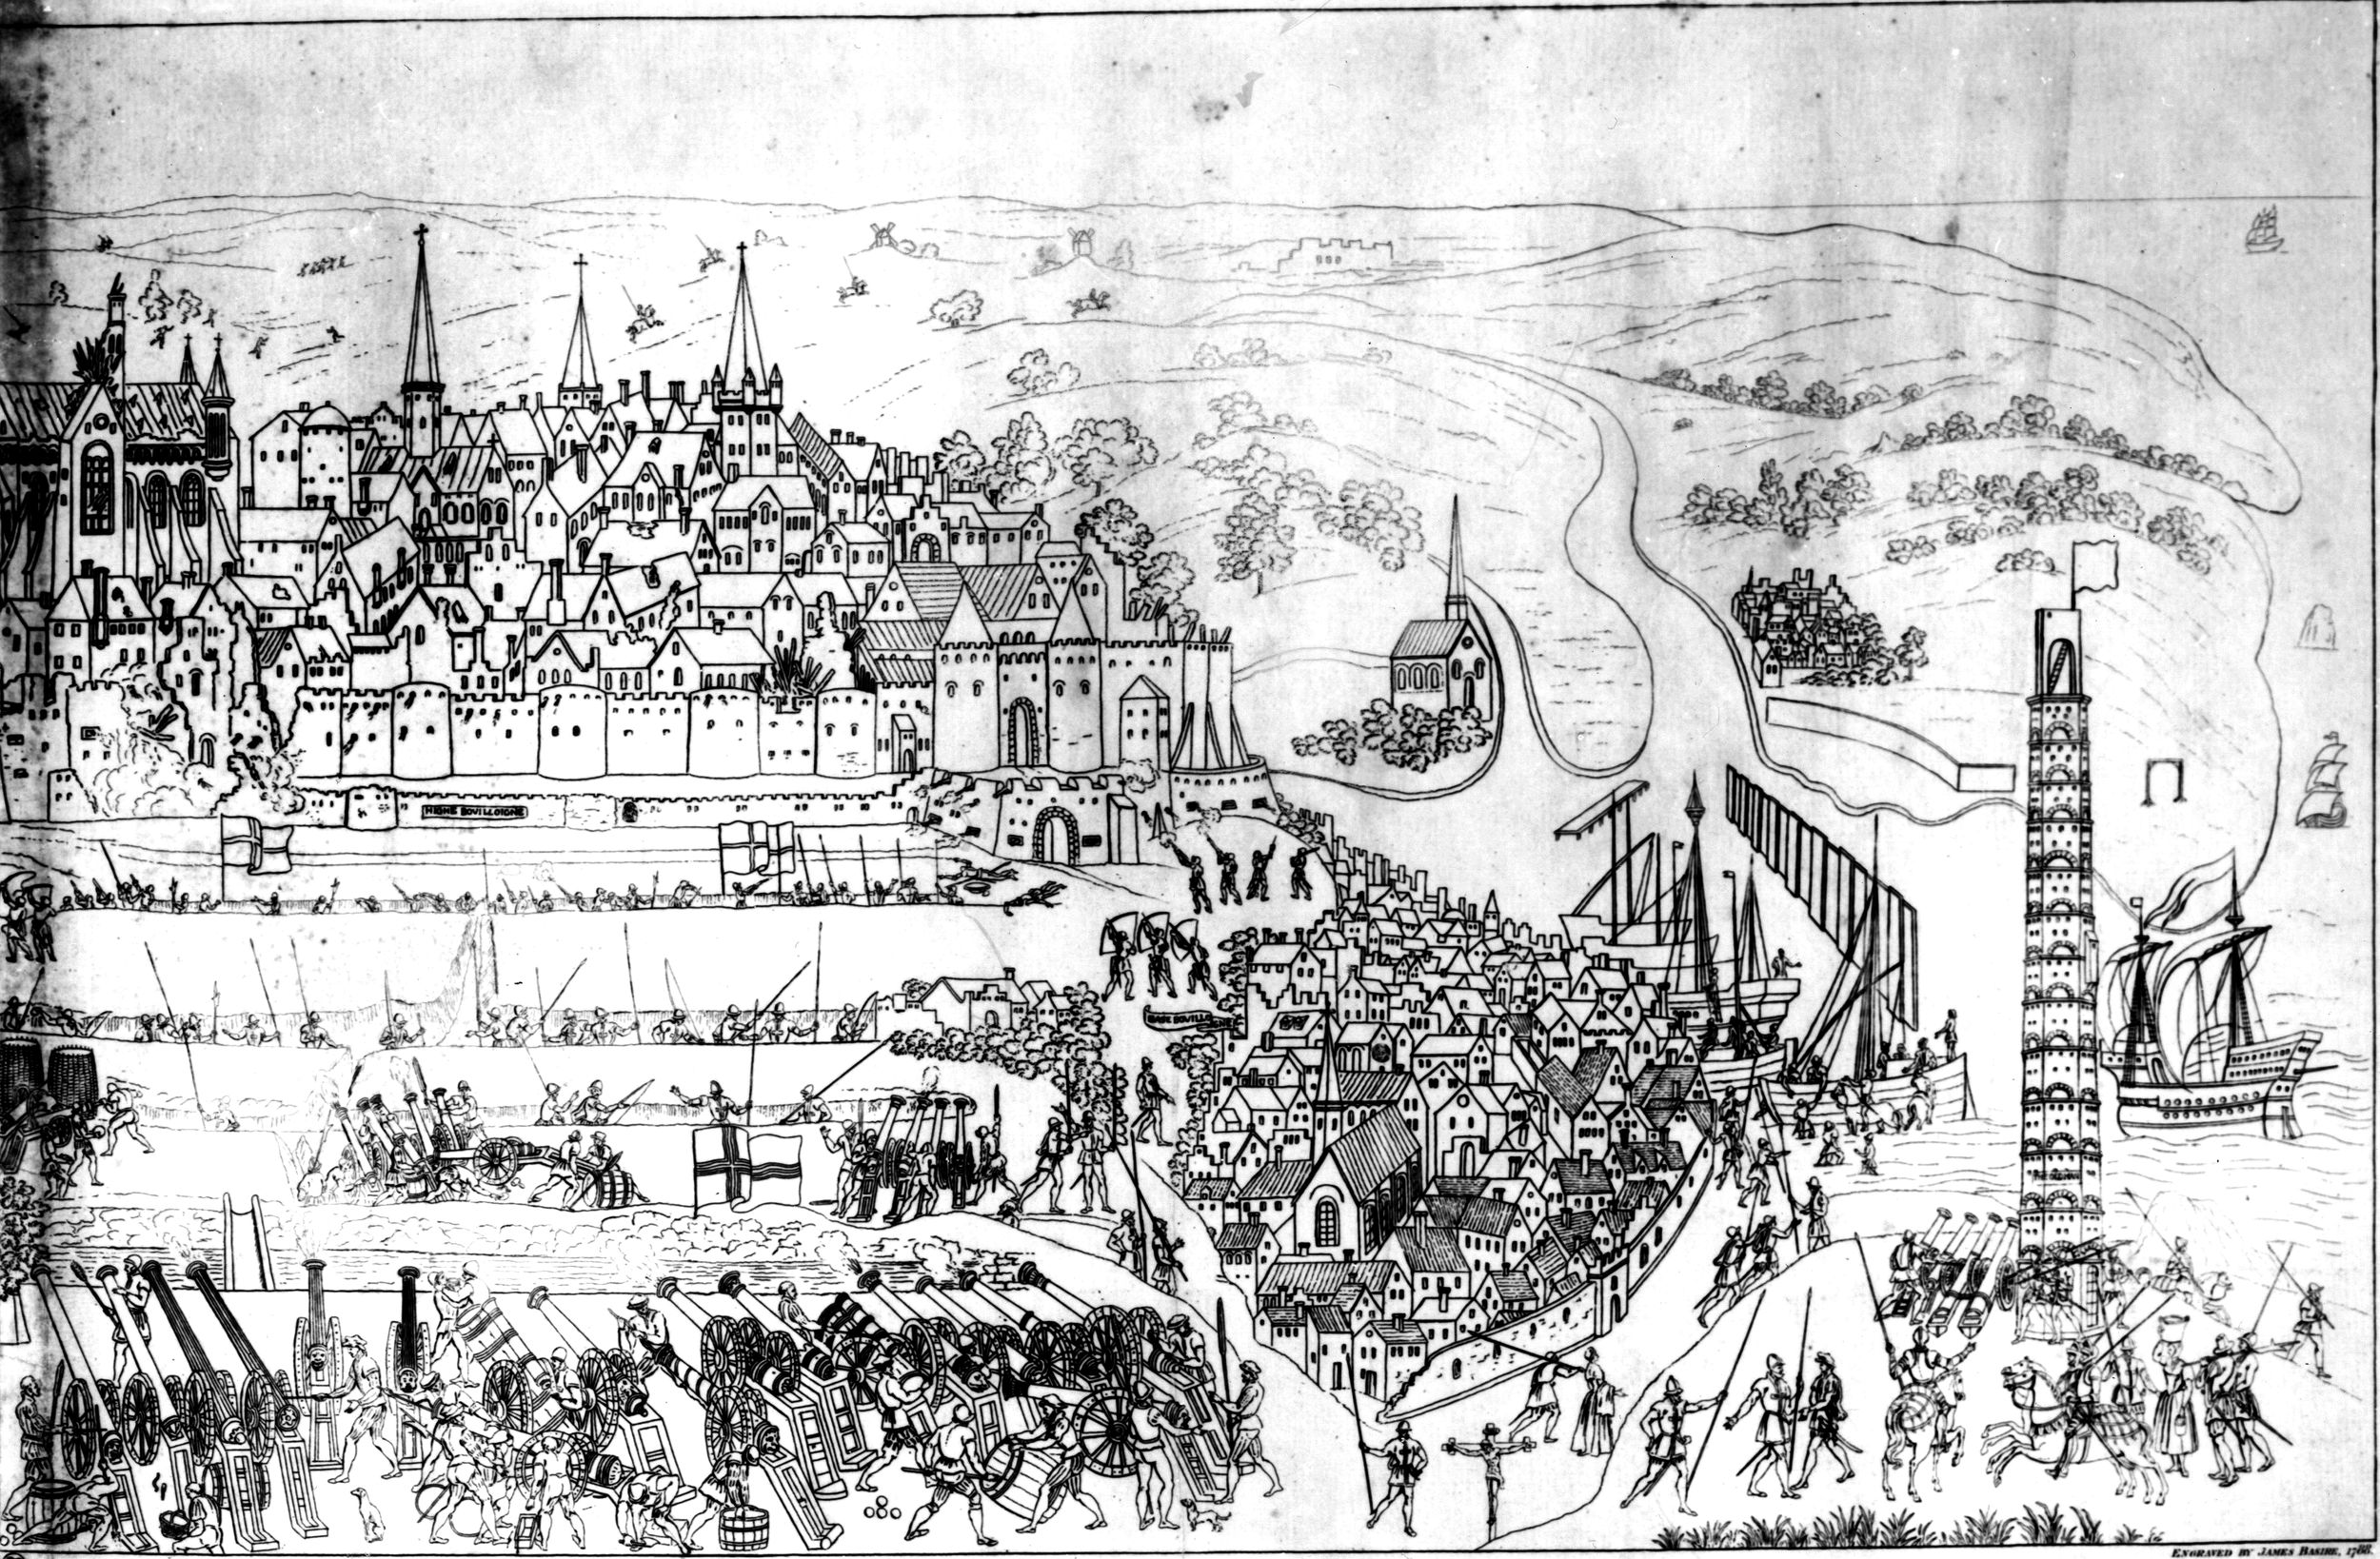 Boulogne fell to the English in September 1544, but would prove costly to hold.